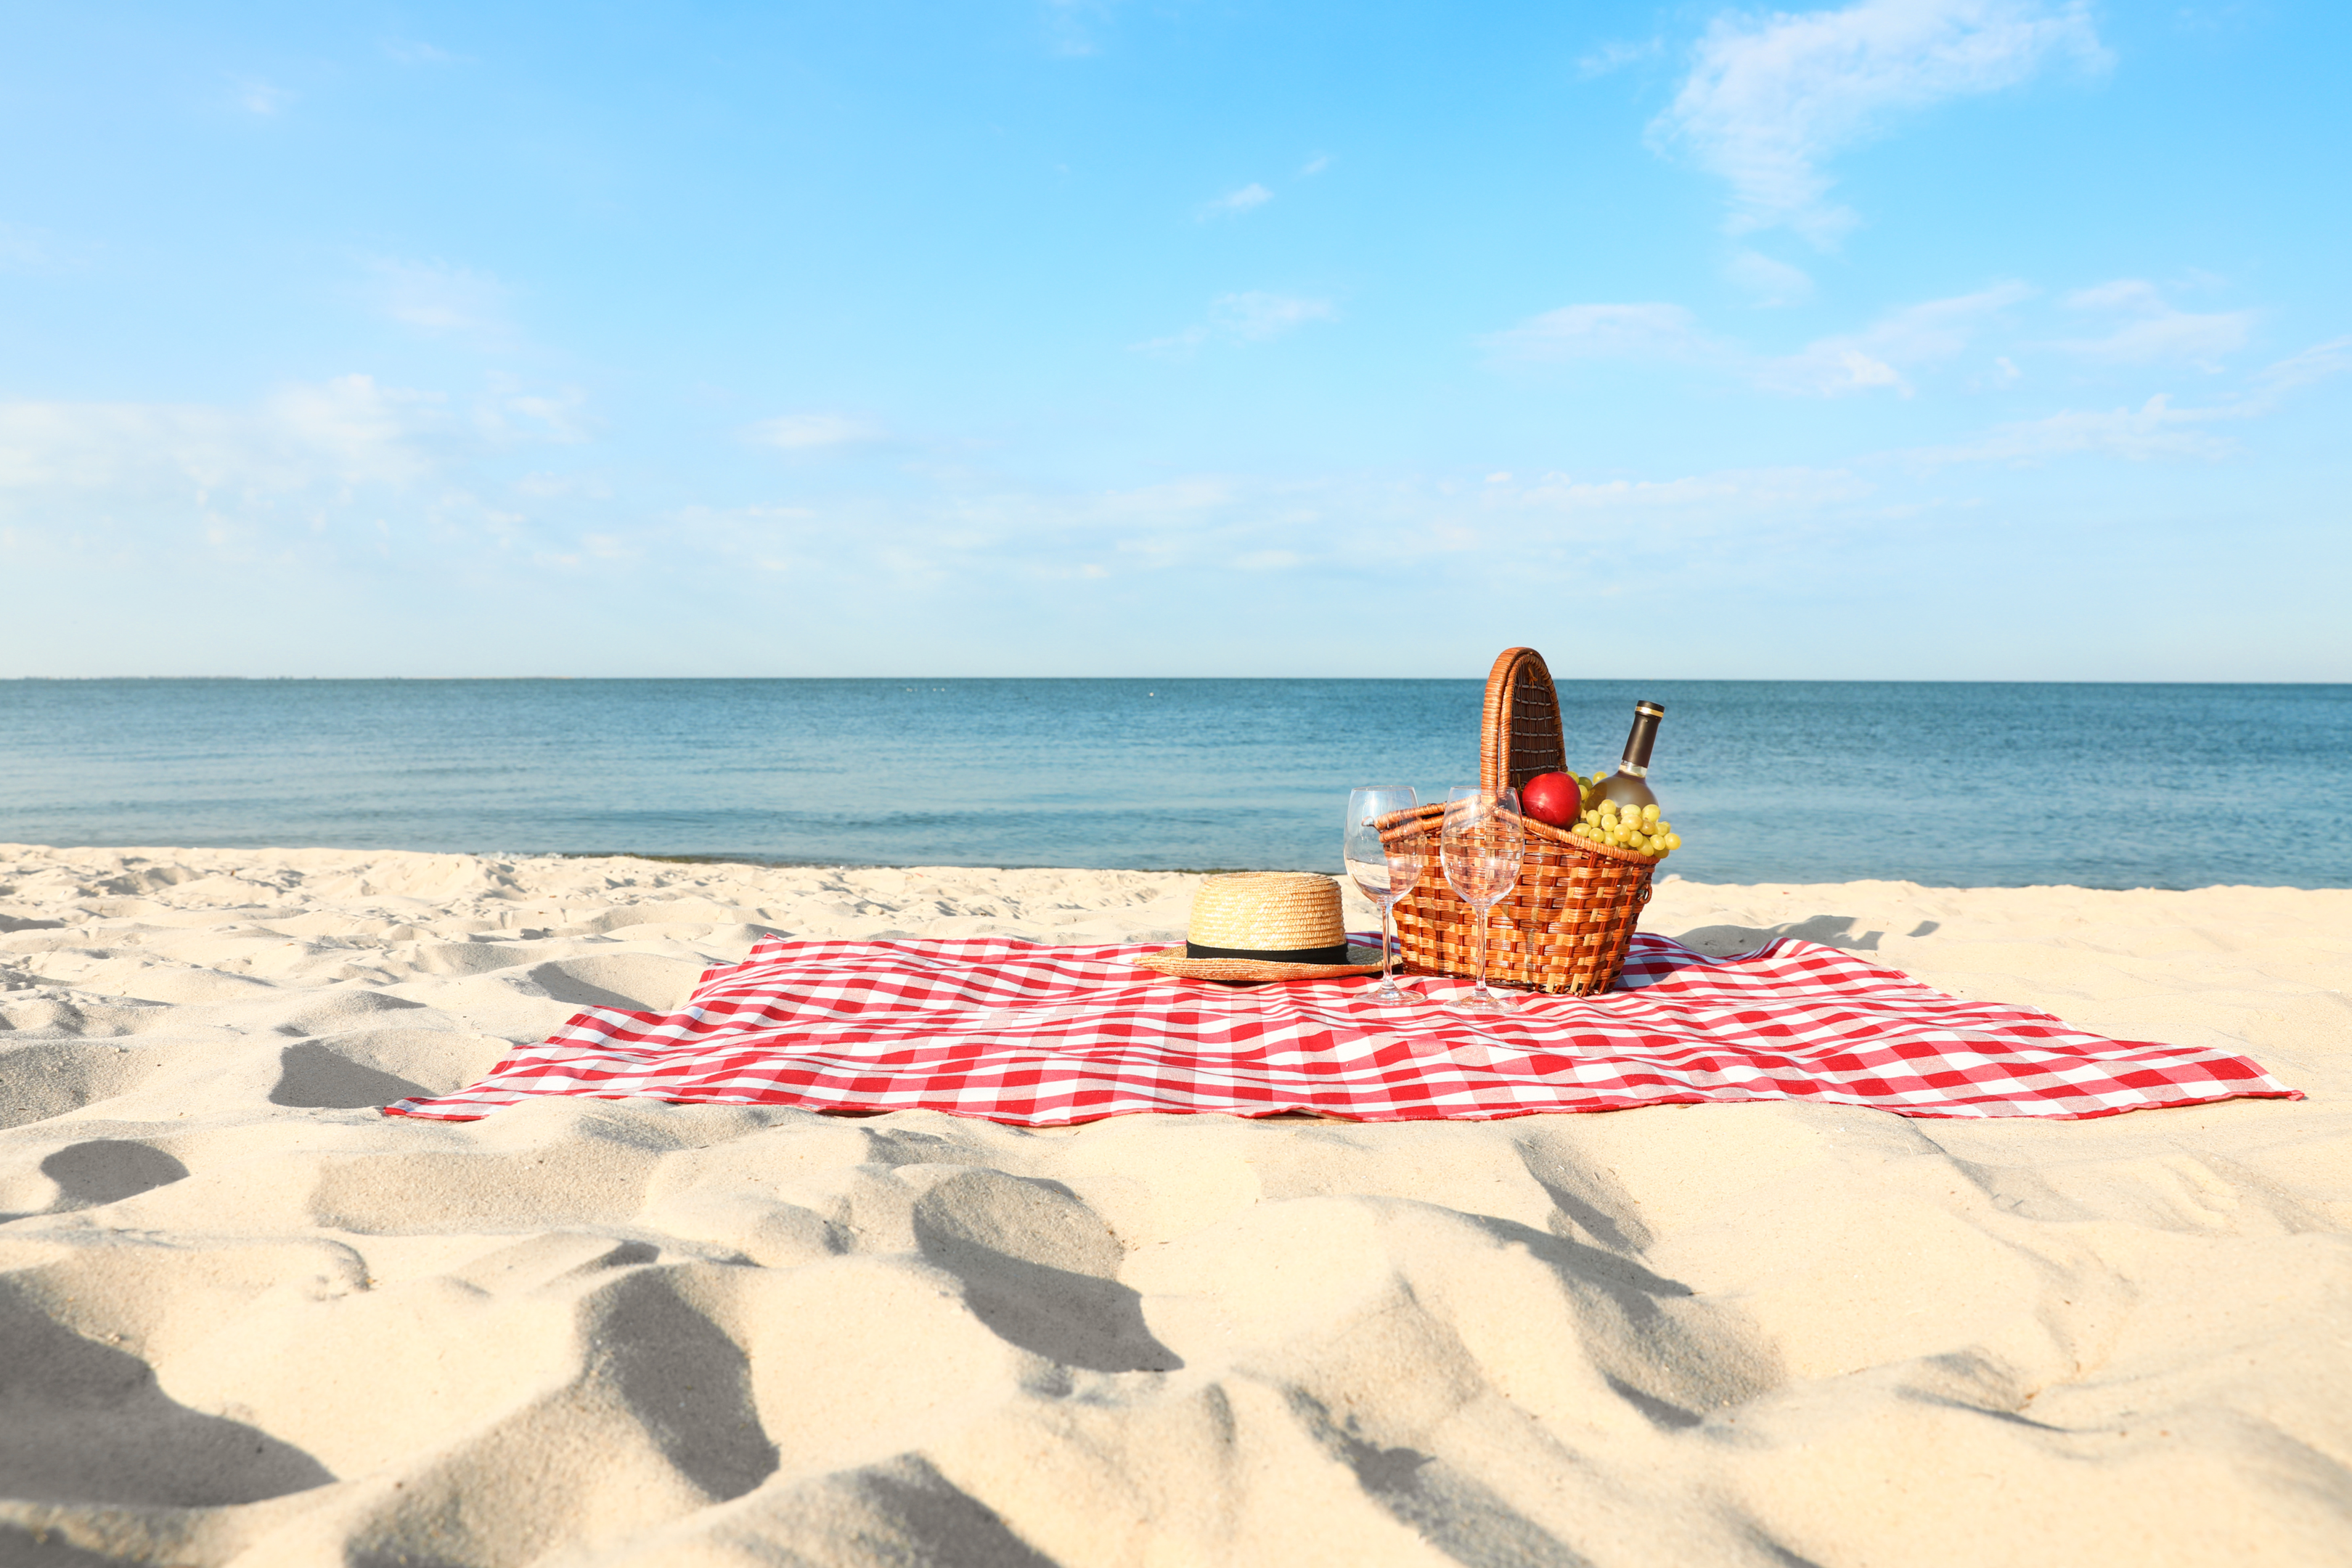 Picnic by the Sea (Shutterstock)